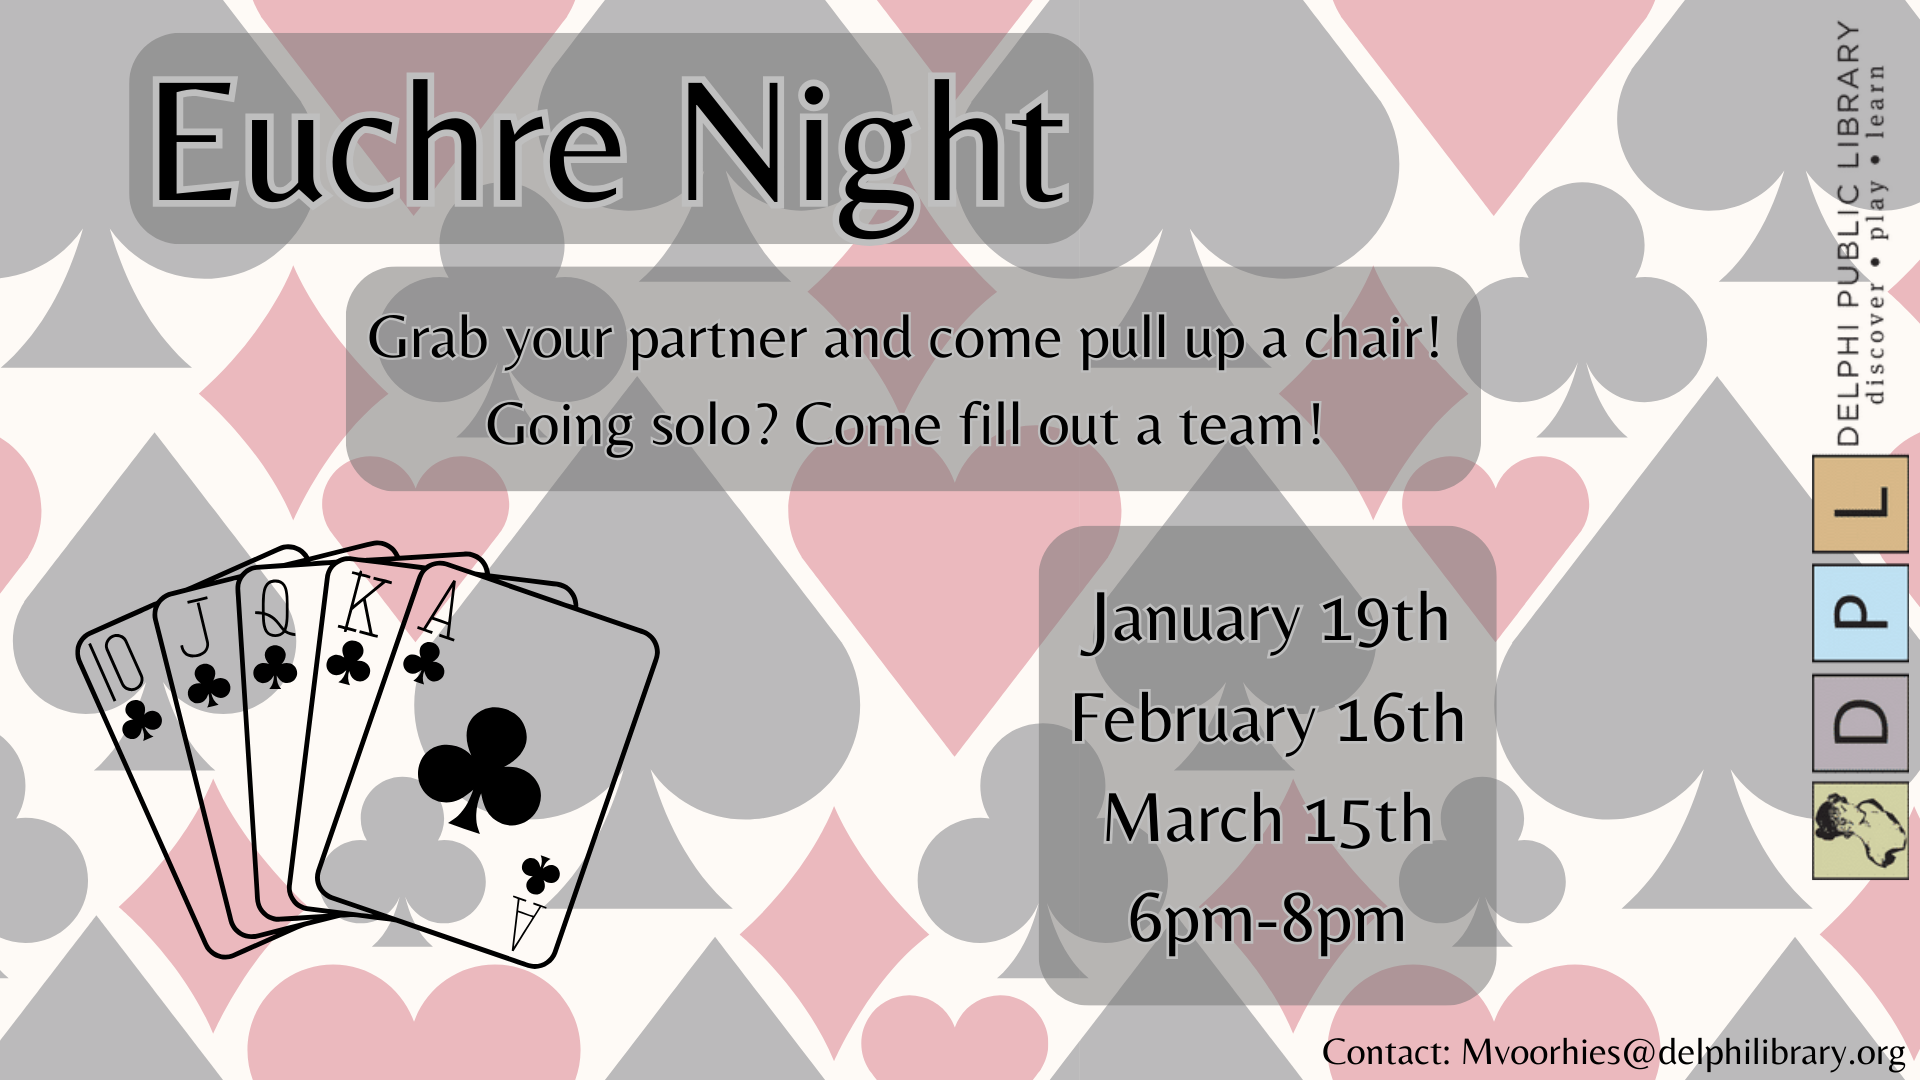 Playing card themed poster with event information